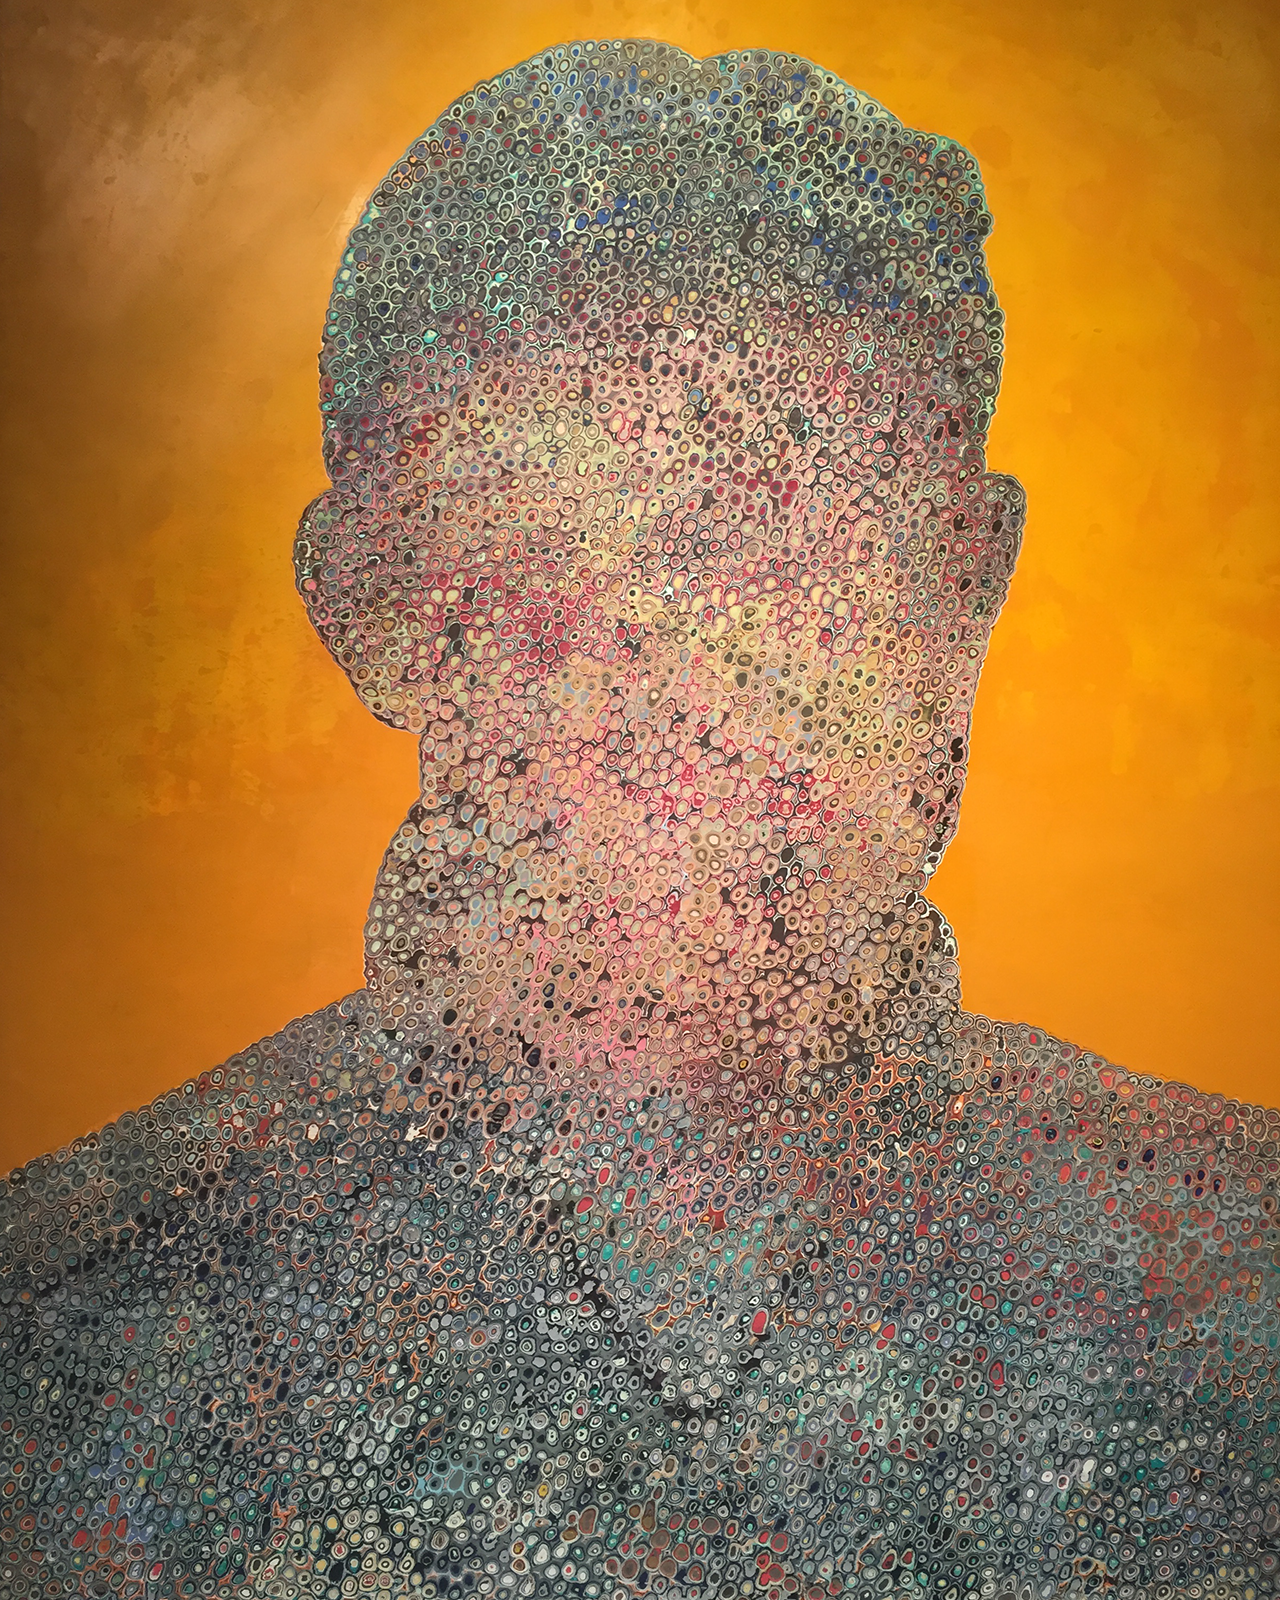 A painting of a person. The background is a warm yellow. The subject’s silhouette is made up of hundreds of drilled holes revealing the several colored layers of paint. 